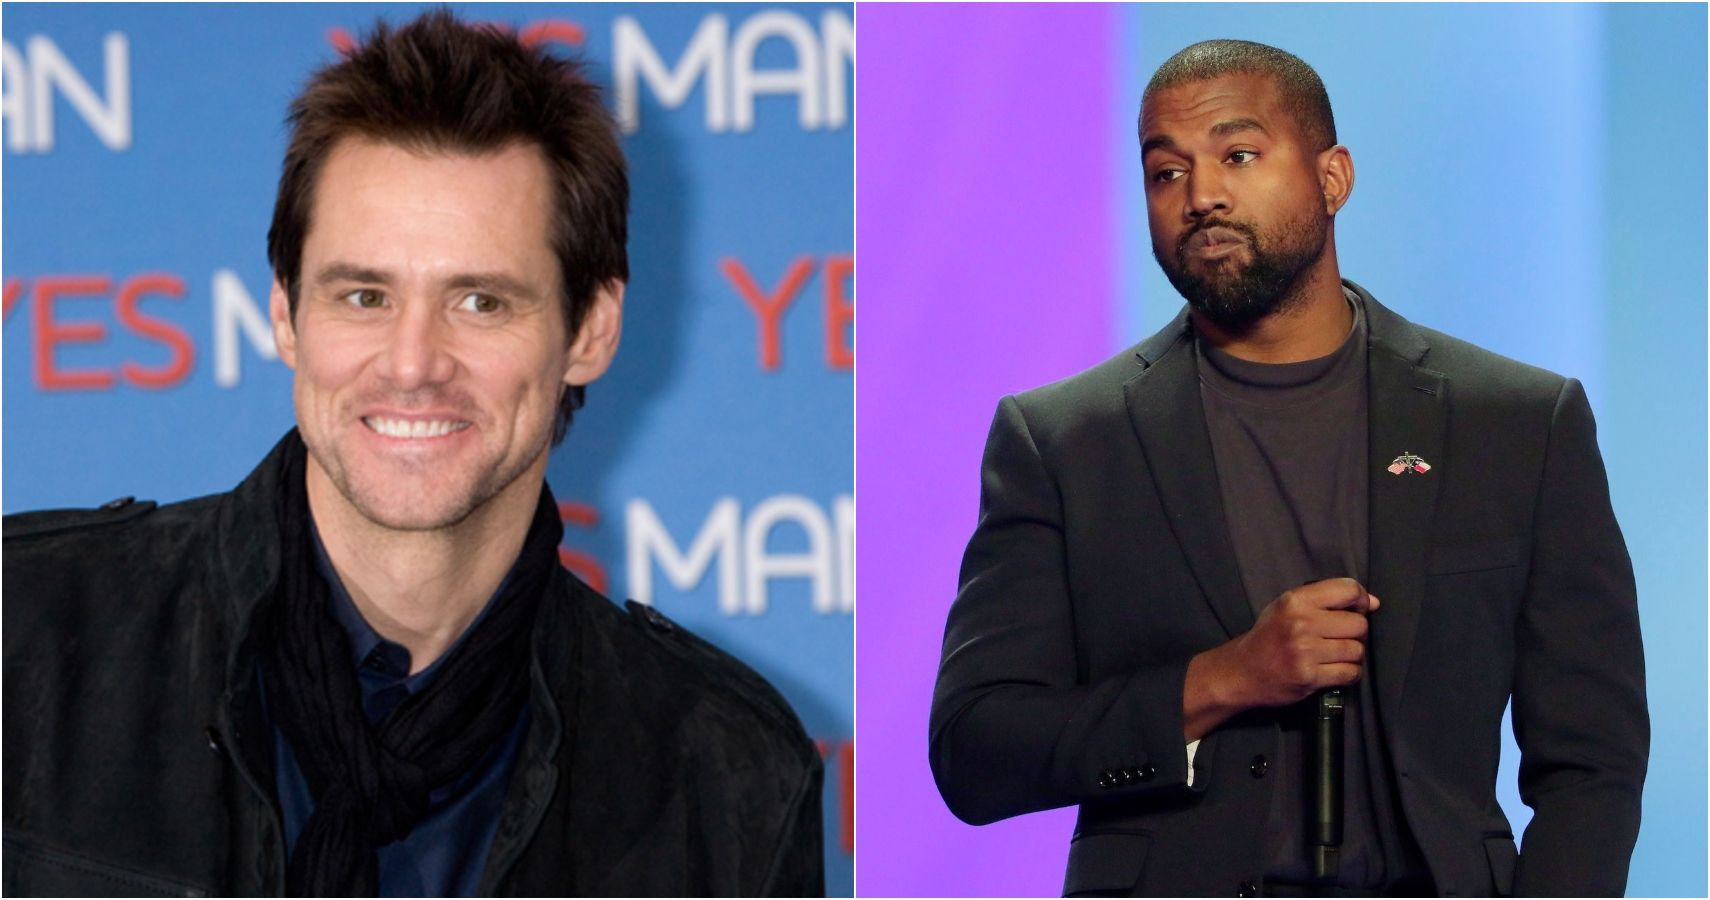 Jim Carrey and Kanye West